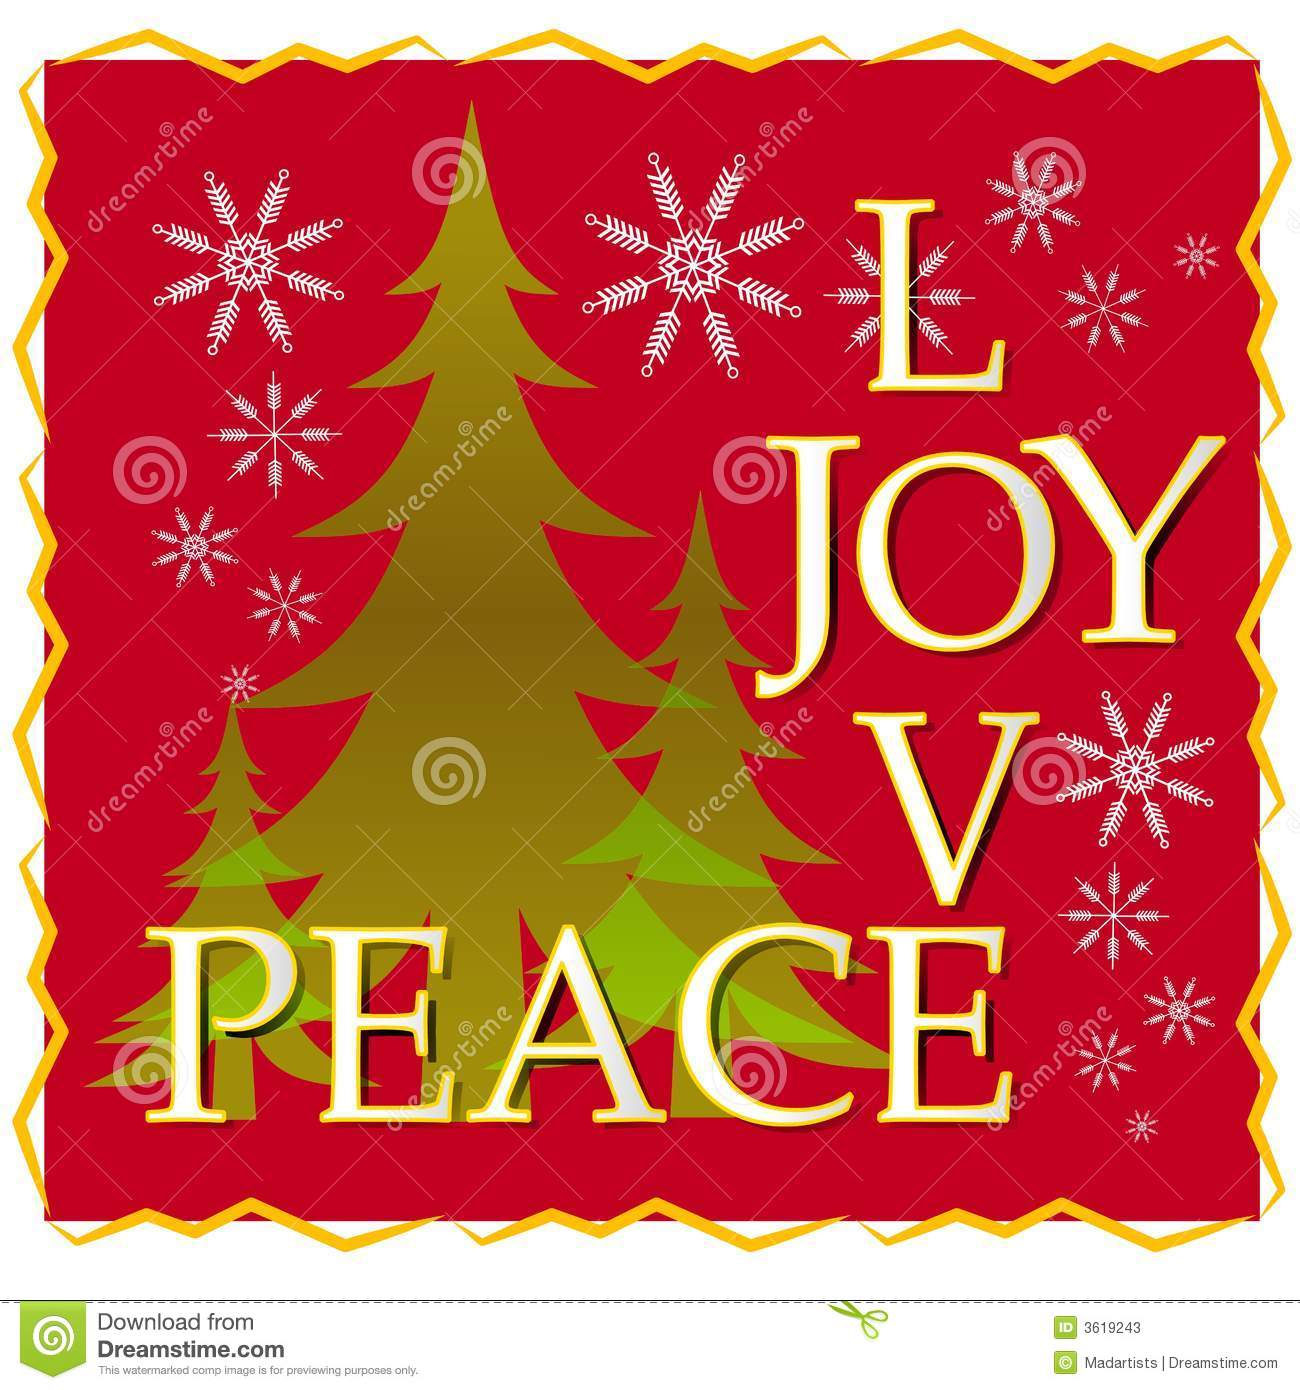 Clip Art Illustration Of The Words  Love Joy And Peace  Integrated